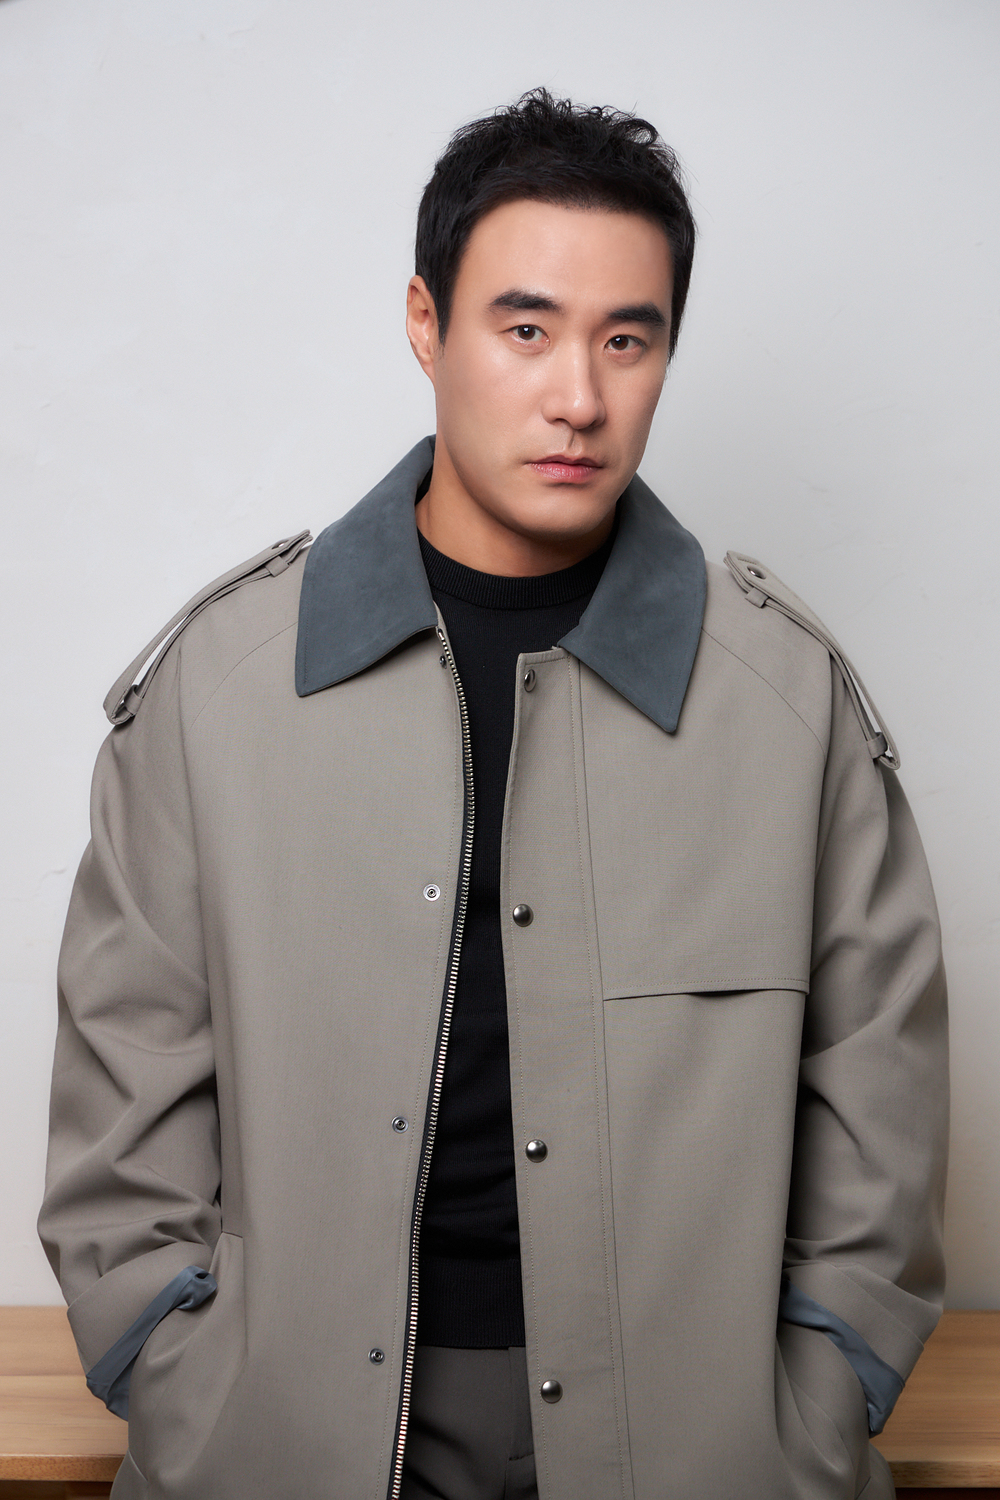 Bae Seong-woo expressed his feelings for appearing in the same movie as Jung Woo-sung.Bae Seong-woo, who appeared in the movie The Animals Who Want to Hold a Jeep (director Kim Yong-hoon), said in an Interview held at a place in Jongno-gu, Seoul on February 5, that he had a different breath despite taking a single shot with Jung Woo-sung.The animals that want to catch even the straw, which is about to be released in February, are a crime scene of ordinary humans planning the worst of the worst to take the money bag, the last chance of life.Bae Seong-woo plays the role of a real-life empathy Character Jungman to enhance the immersion of the drama.Bae Seong-woo, who was cast at the last time, confessed that he had once testified to his appearance because he thought it was a difficult Character to express.Asked if Jung Woo-sung gave advice on the movie appearance, Bae Seong-woo said, I met in the middle and talked while drinking. I think you made a decision too well.I really liked it because I thought I made a good choice. Regarding the indecisive Character Taeyoung played by Jung Woo-sung in the drama, It is a really different Character from writing.In the novel, he was a heavy, agonizing figure, and he felt like a dark crime, but he was cheerful in the movie, but he seemed to be sympathetic.Hes handsome and hes good, but the Character of Hogu also looks good. The two meet in the scene where Taeyoung asks Jungman, a sauna employee, to buy only one cigarette.Bae Seong-woo said, Its a god that day. I only see you in this scene. It ended in one take. It ended so soon, What are we doing today?I remember doing it.  This is the third time I met in the same work. It was easy and familiar for me to play in the King.For a while, I thought Tikitaka would fit well. Two people who are secretly greedy for gags, what if they meet in private. Bae Seong-woo said, I talk a lot about movies. I talk about it.The Actors seem to have a gag desire. There are many friends who prepare and practice with this.pear hyo-ju